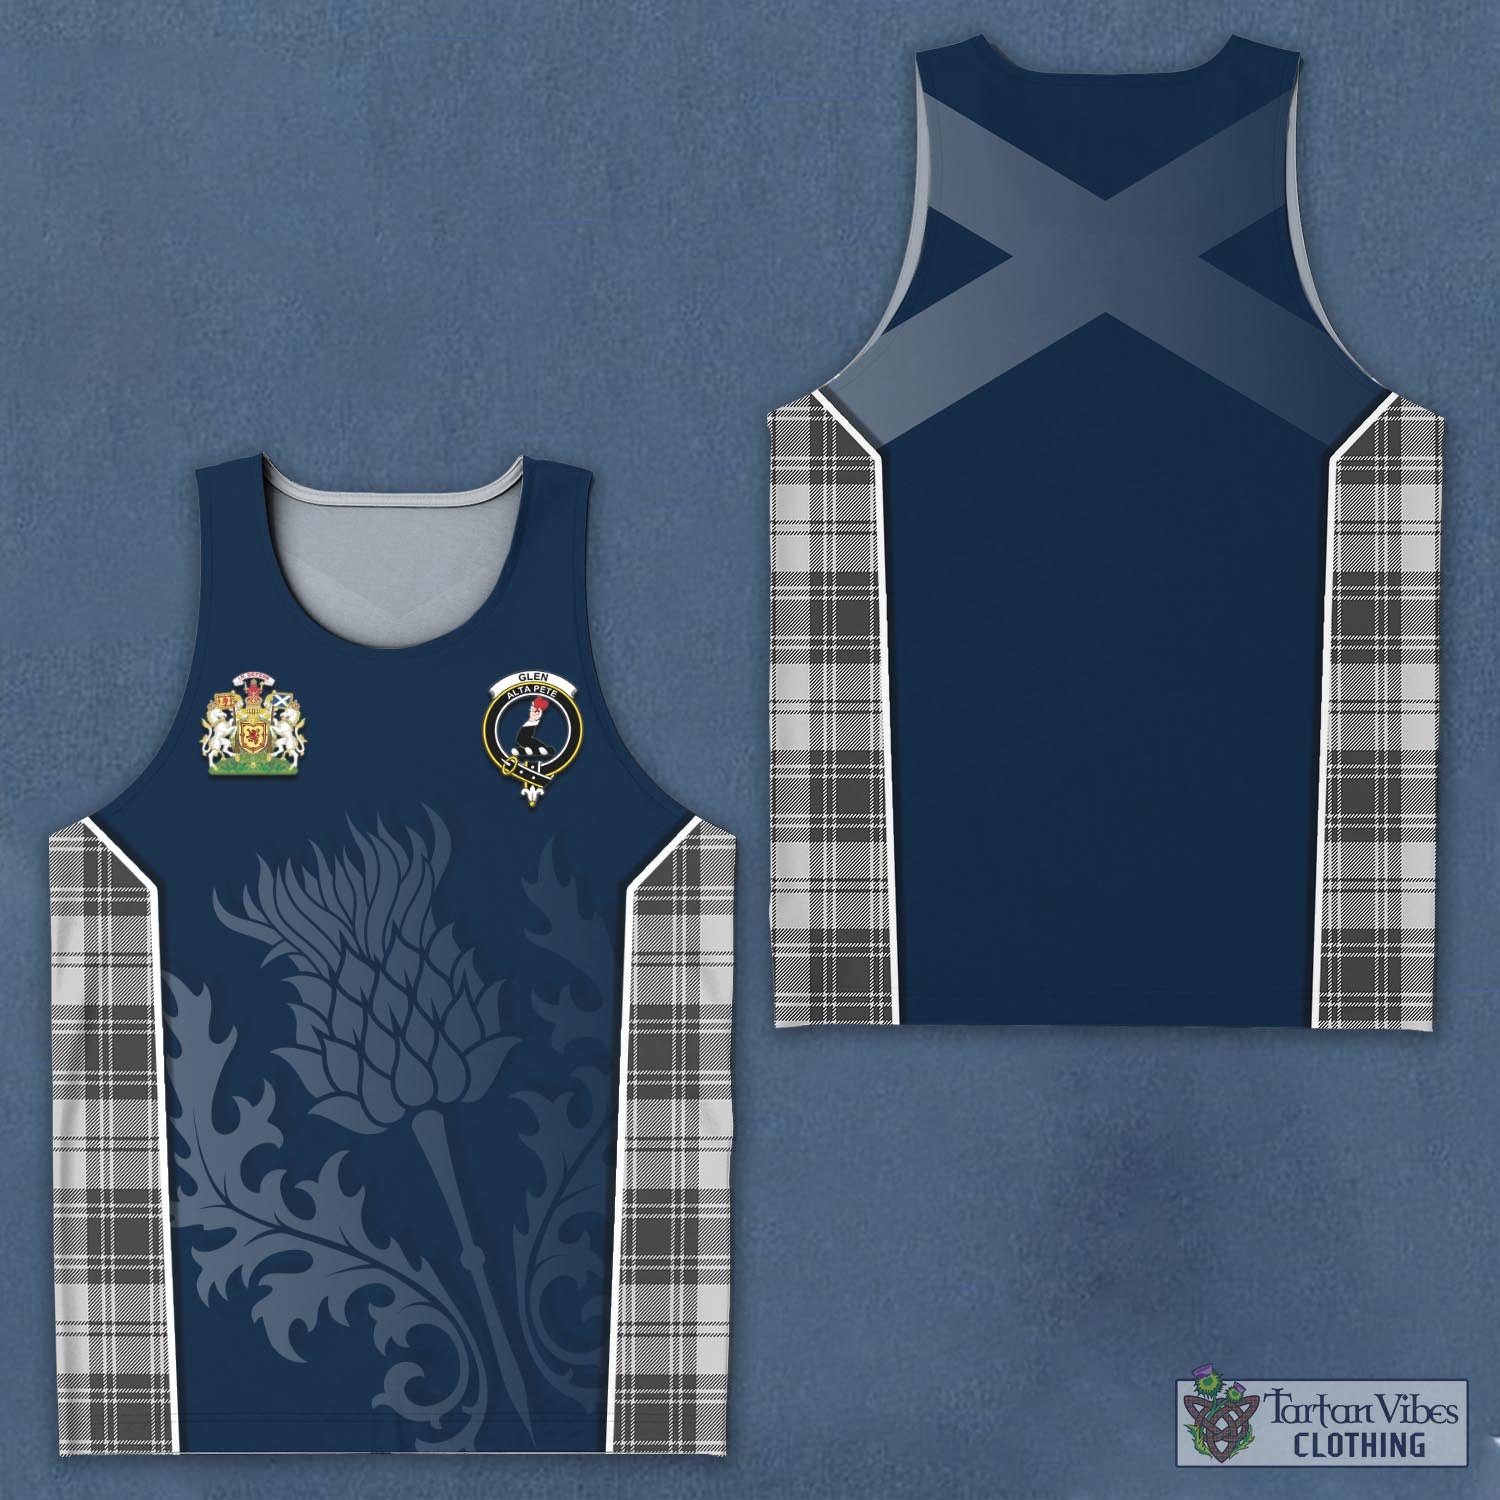 Tartan Vibes Clothing Glen Tartan Men's Tanks Top with Family Crest and Scottish Thistle Vibes Sport Style